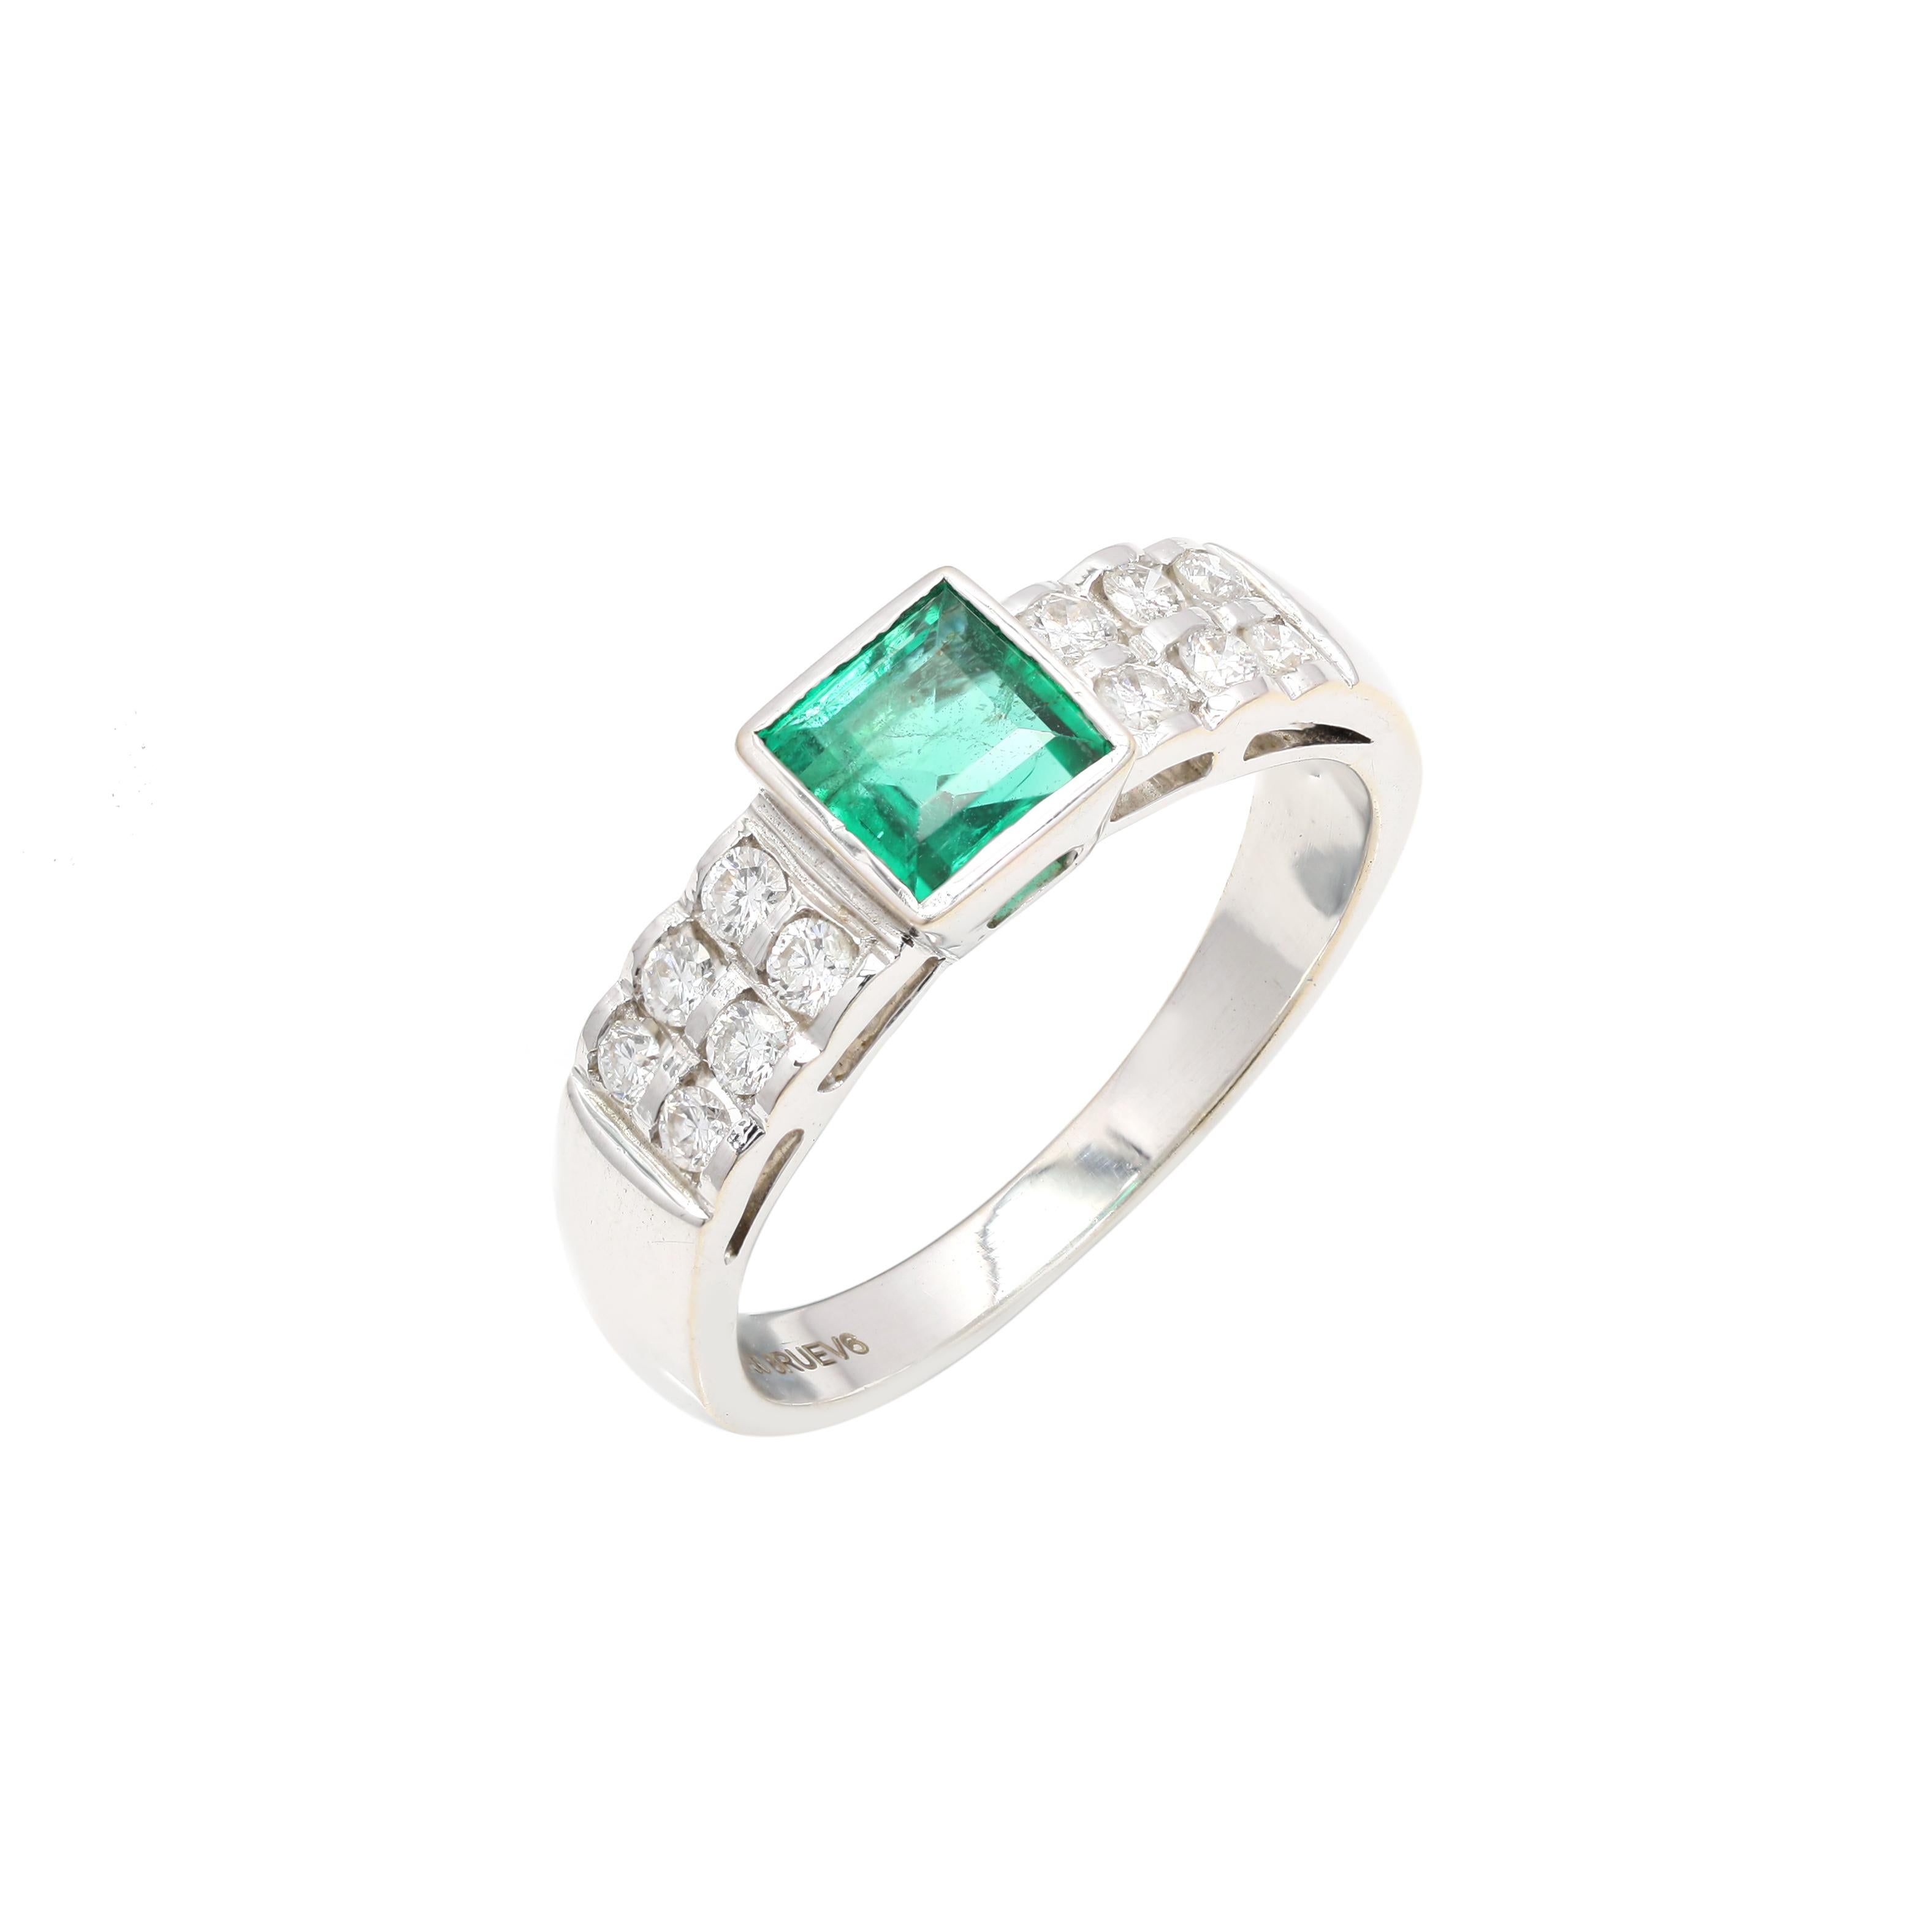 For Sale:  Unisex Diamond and Natural Emerald Engagement Band Ring in 18k White Gold 4